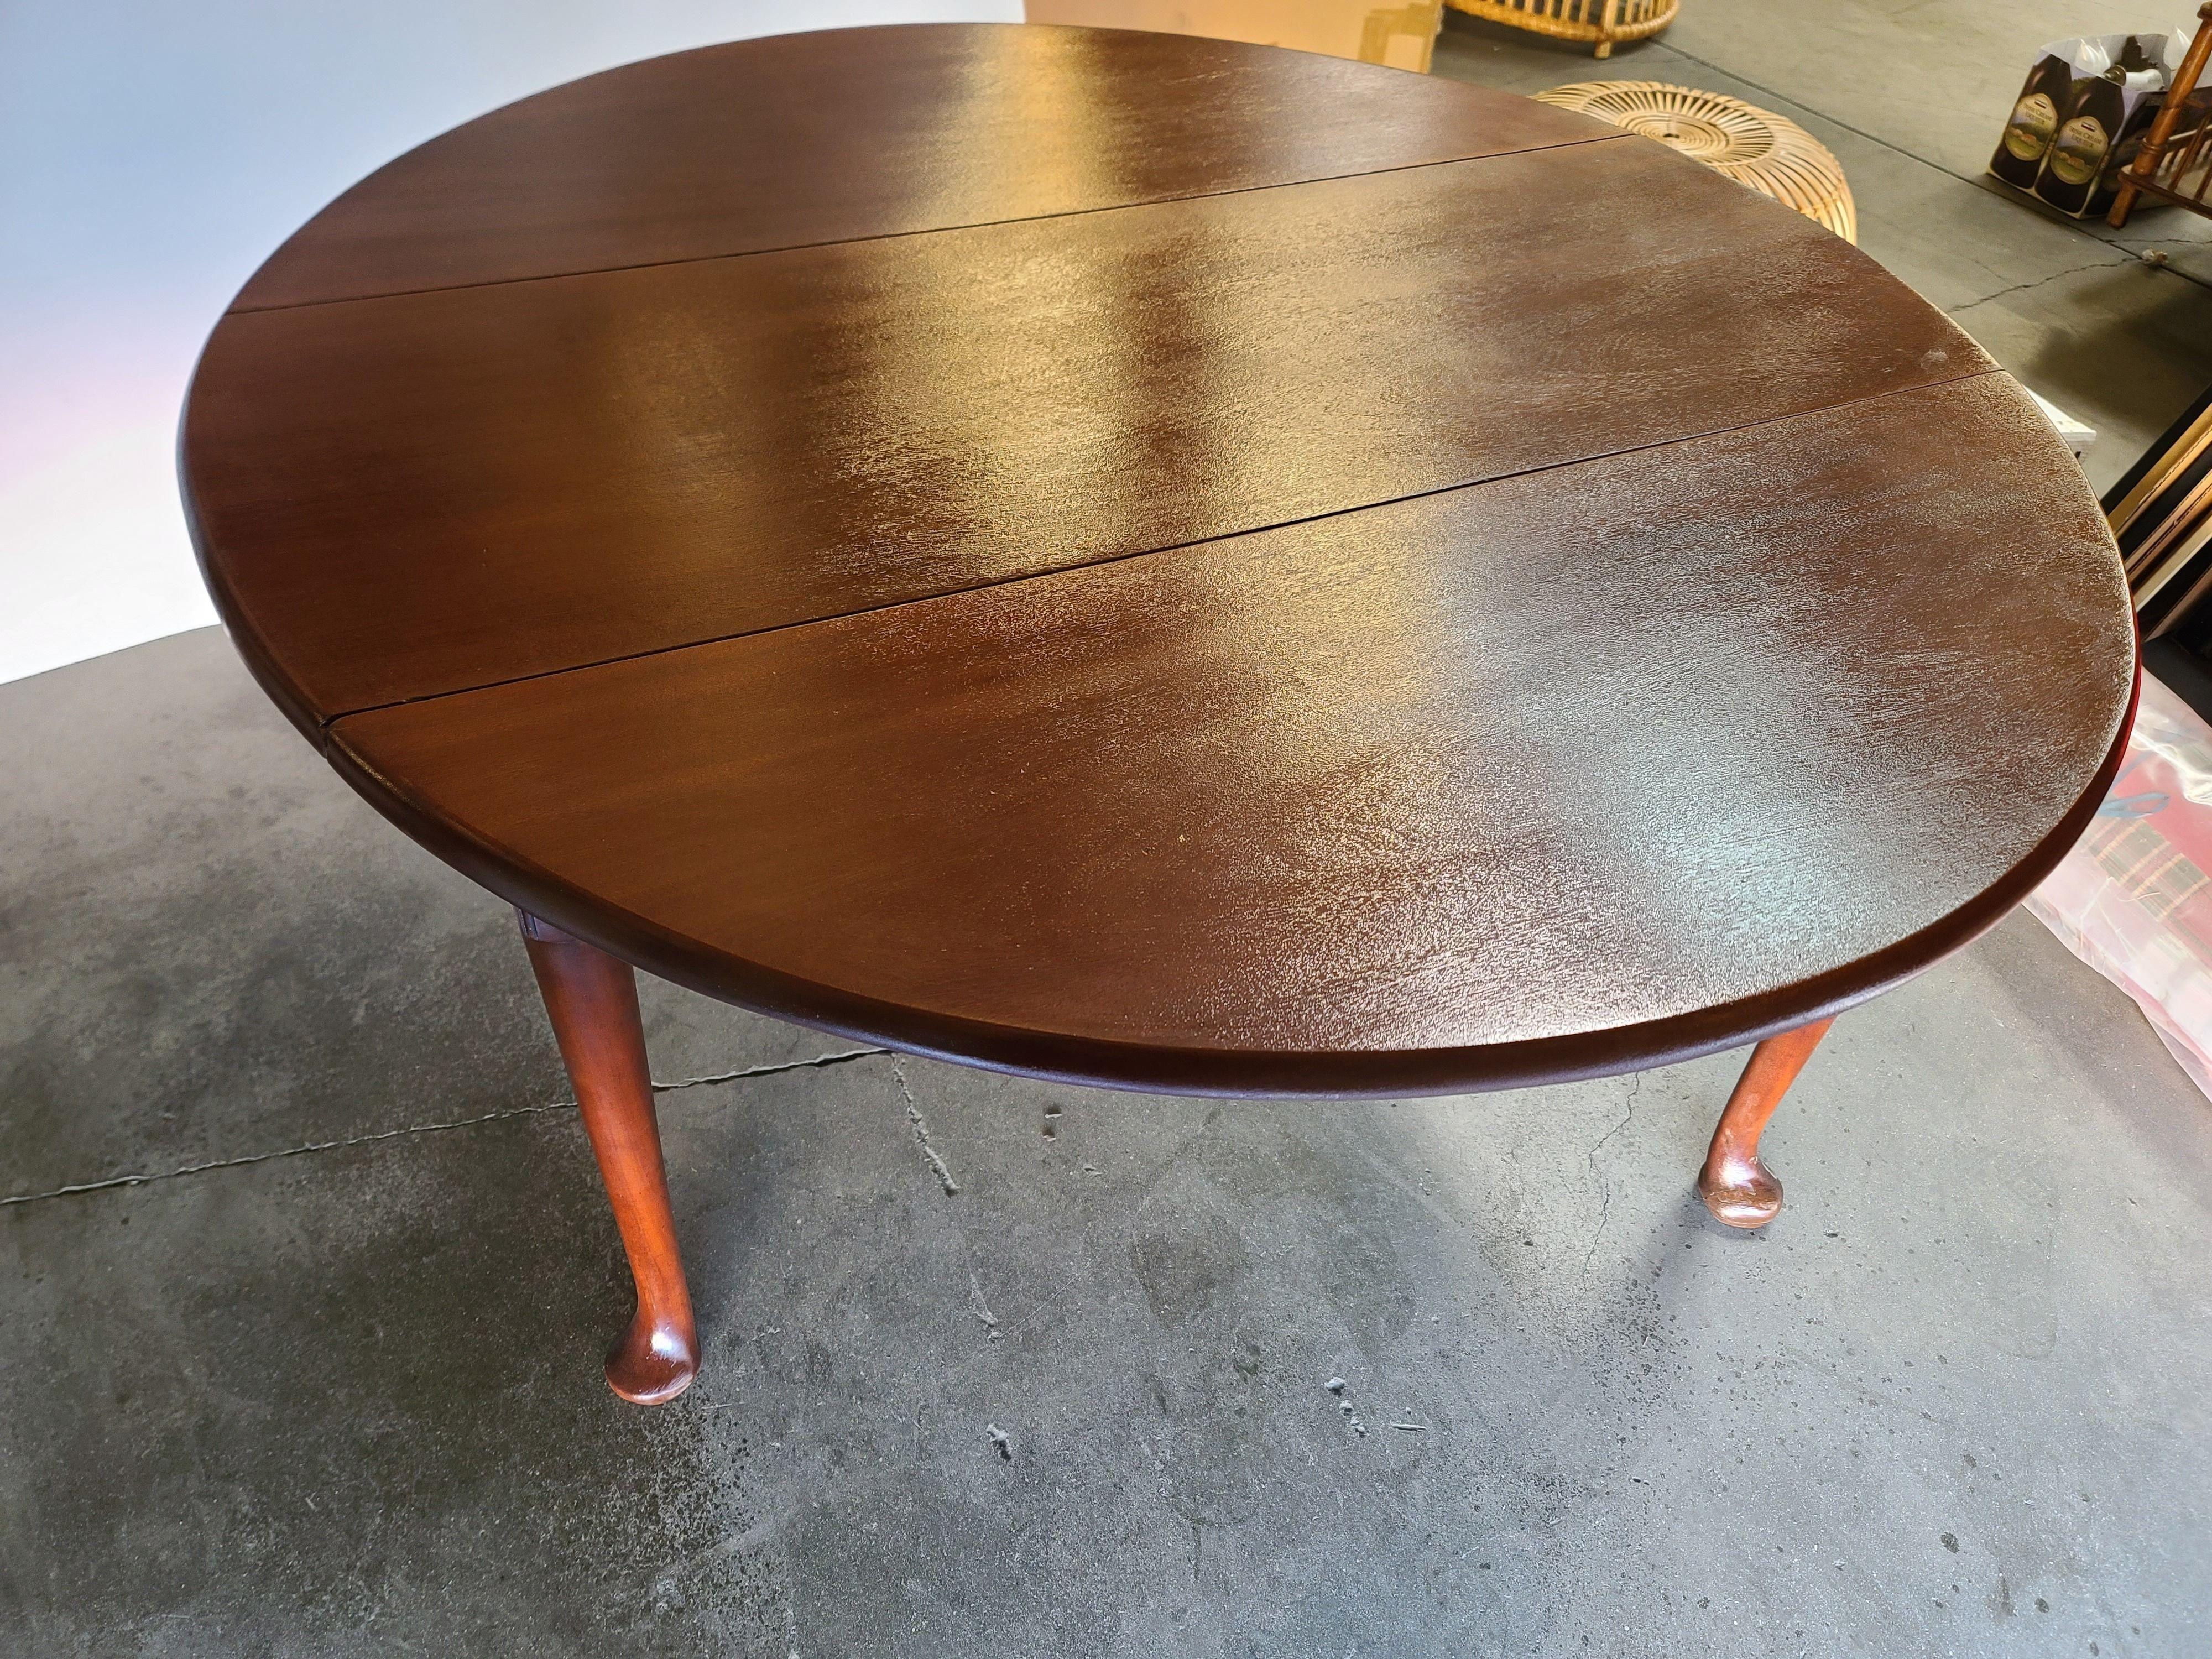 Large Mahogany drop leaf table 1940s great for a small useable dining space.